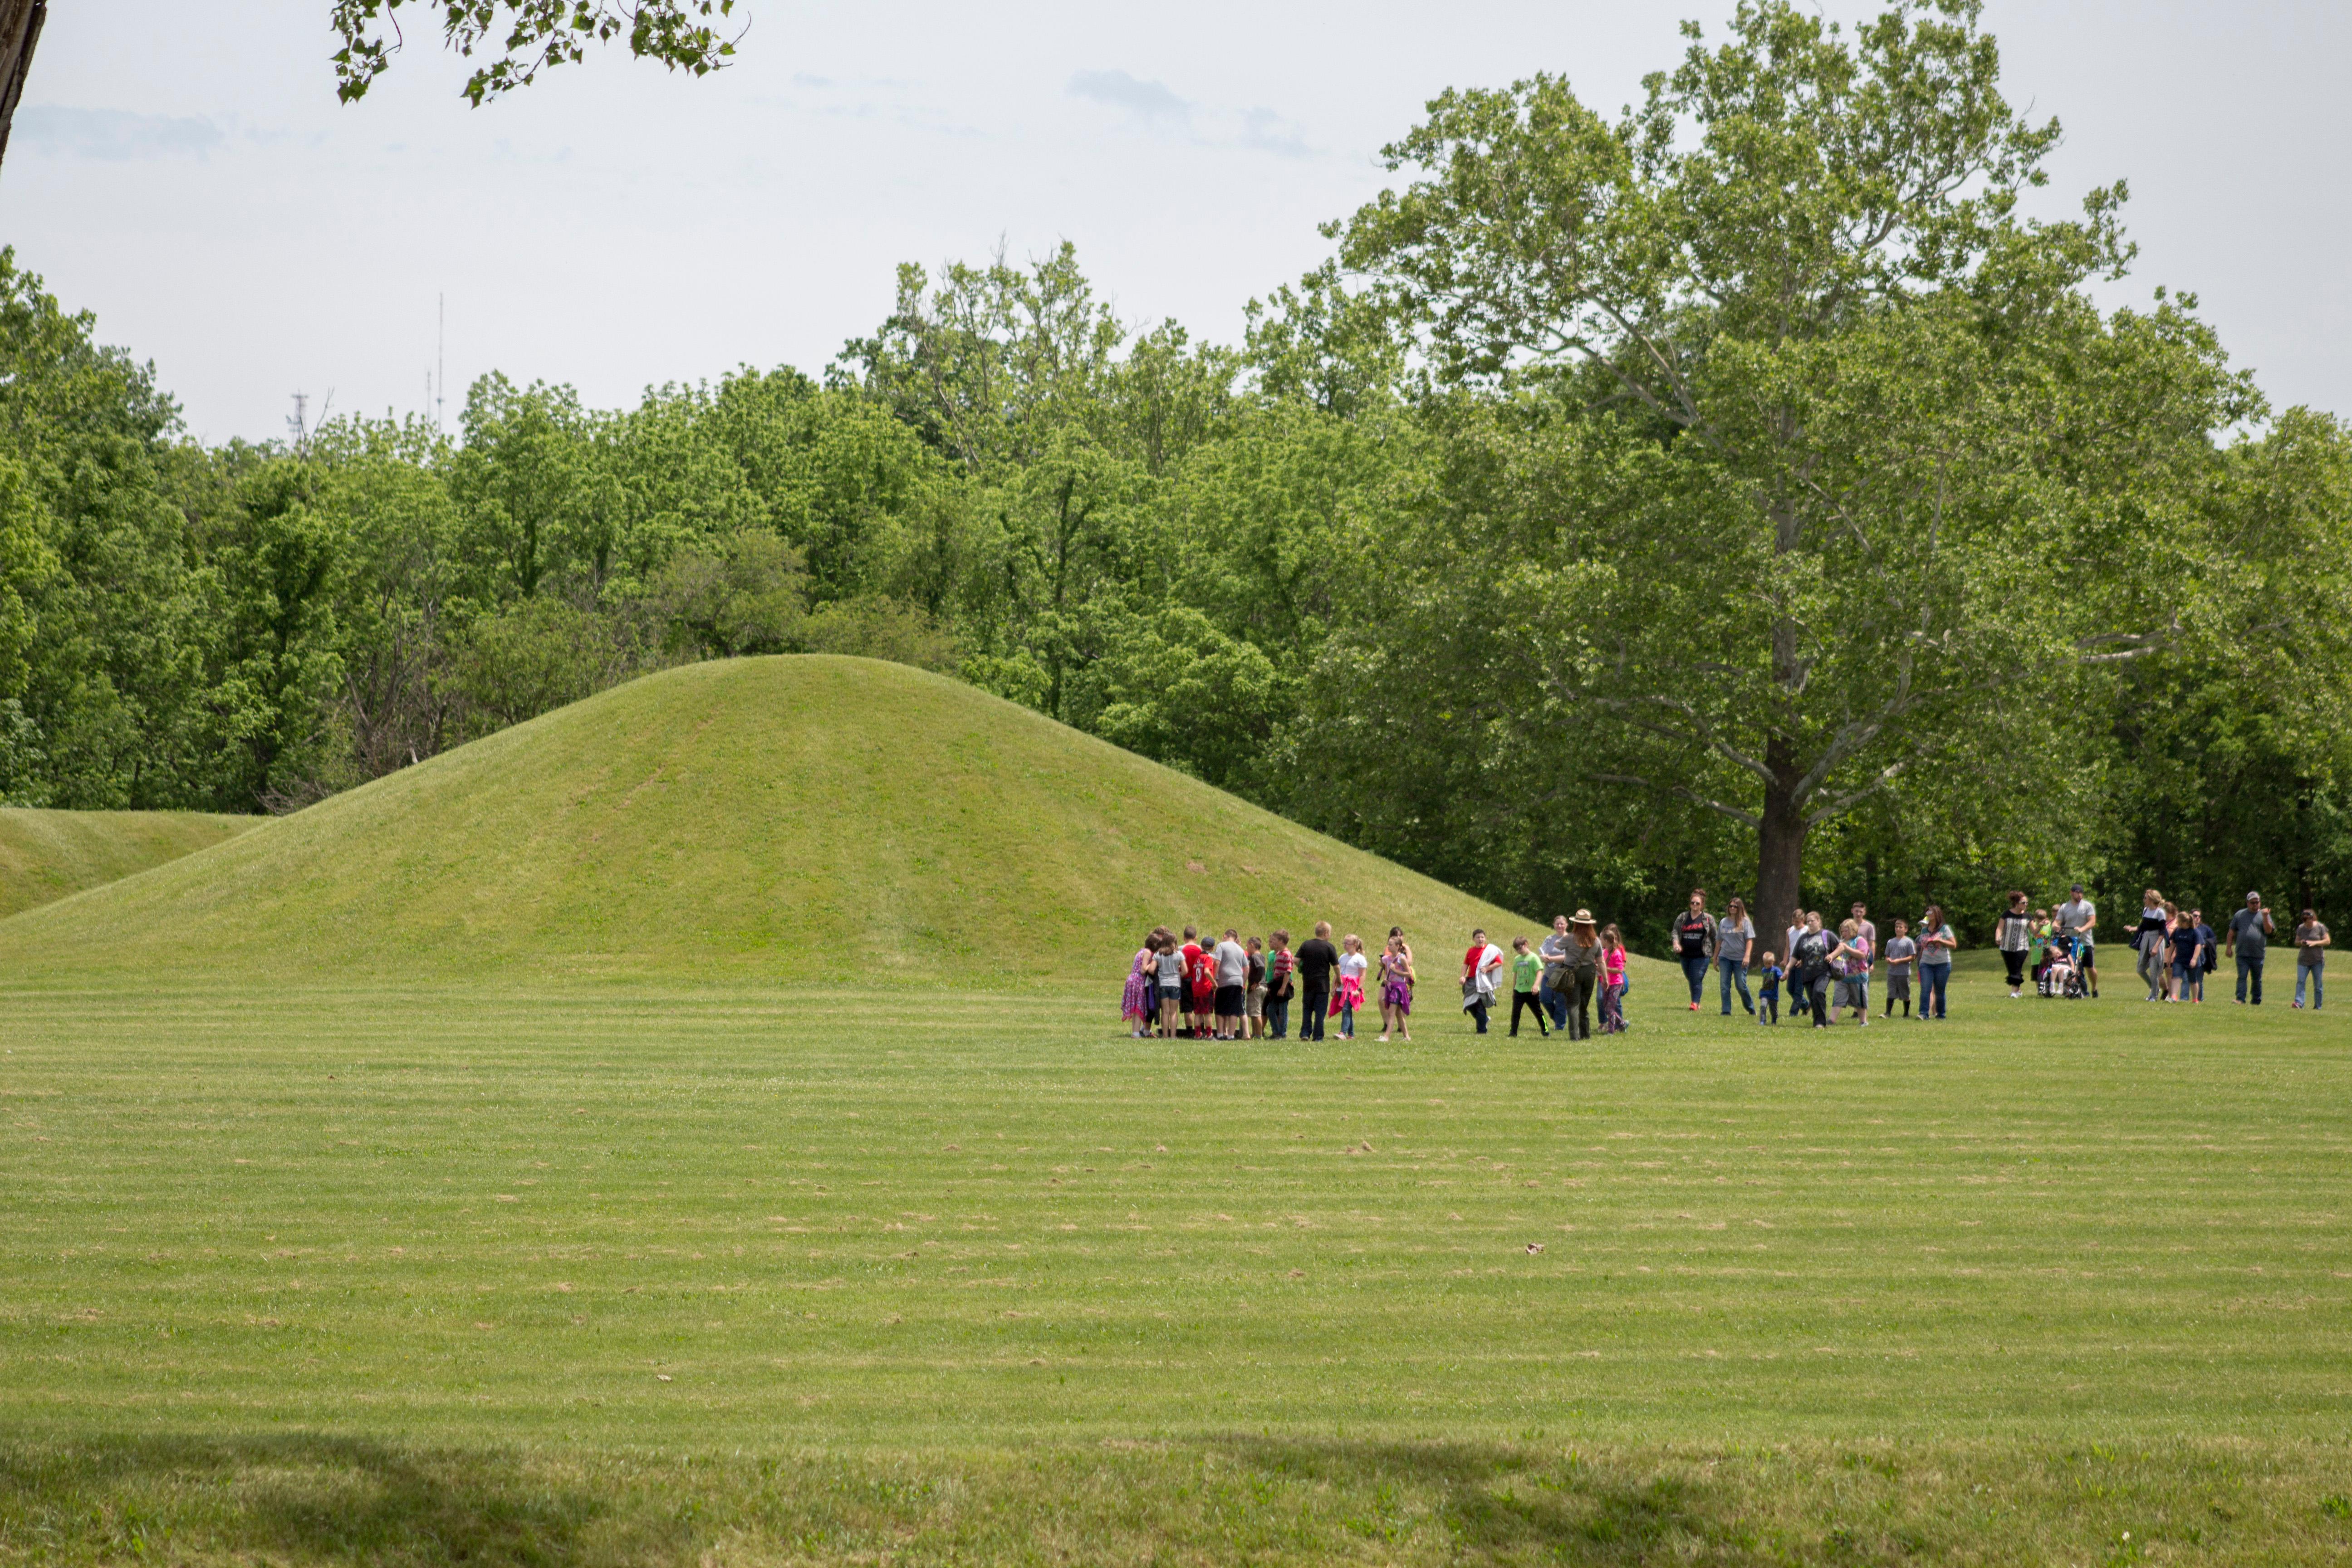 Several children walking with a park ranger in a flat hat near grass-covered mounds.